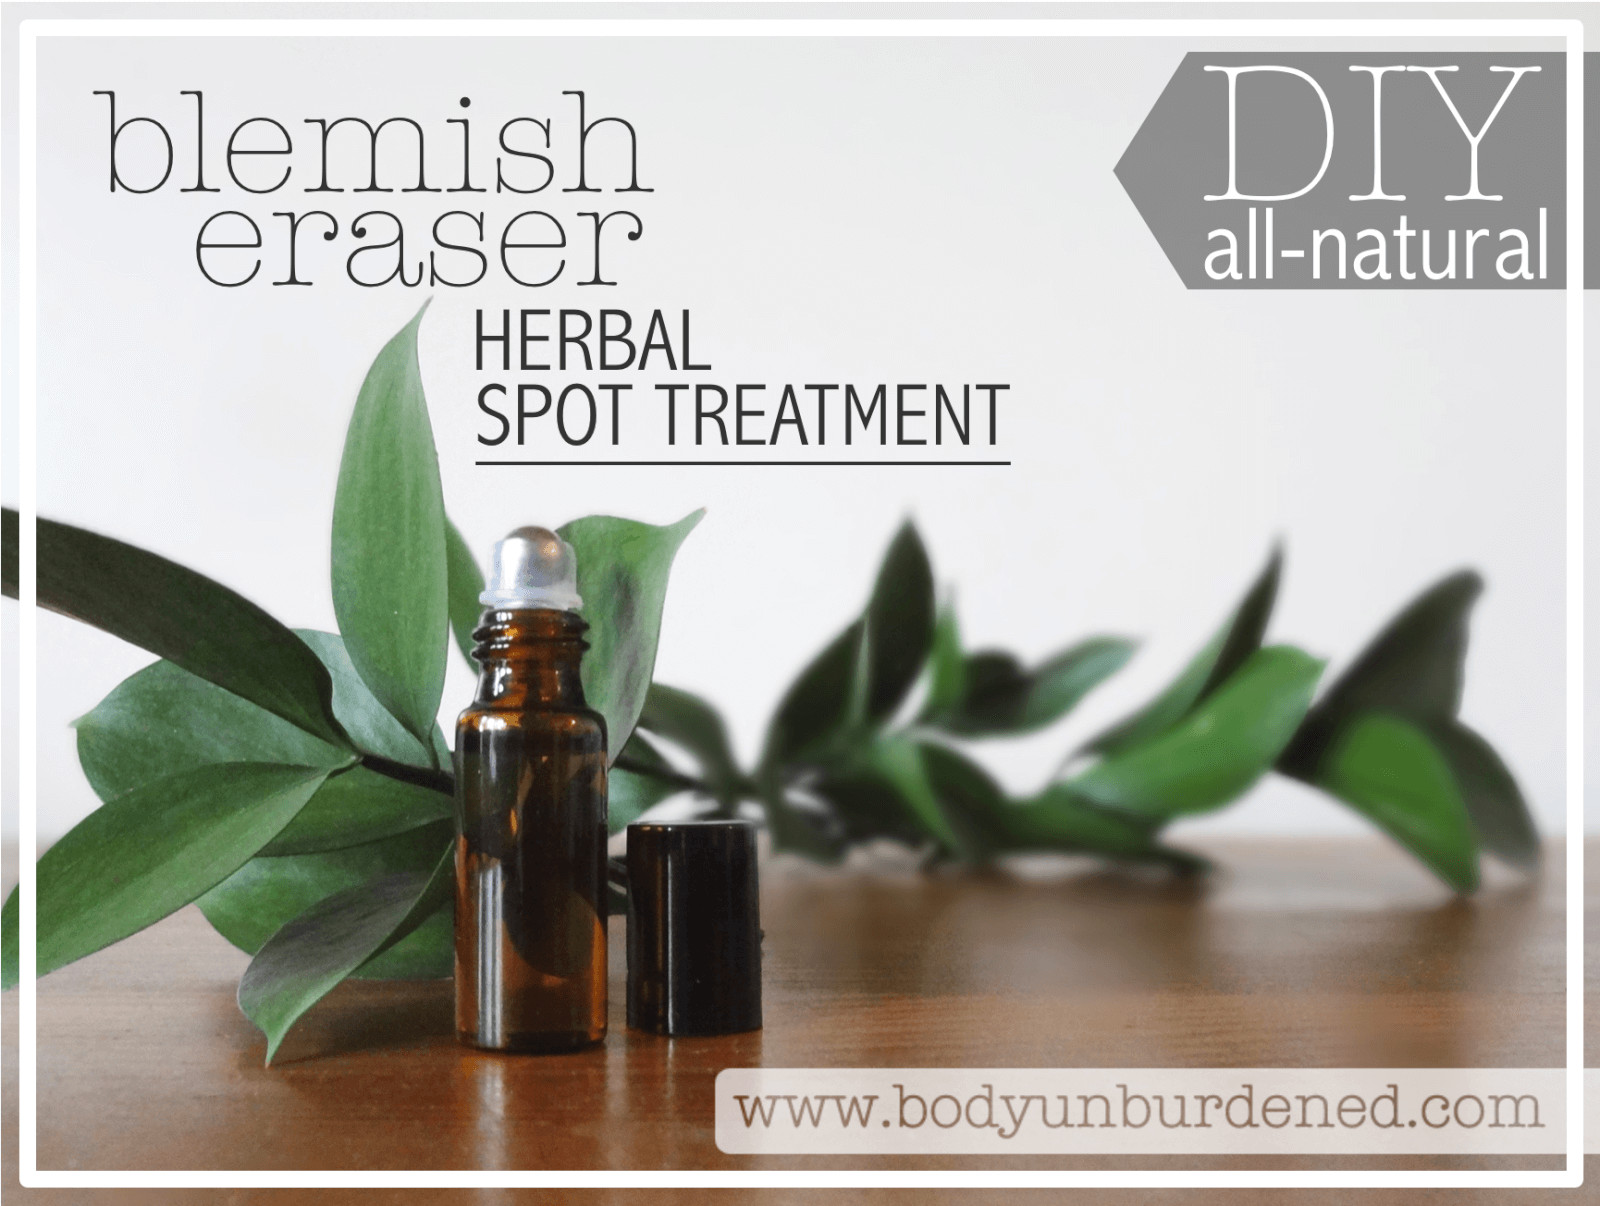 Best ideas about DIY Spot Treatment
. Save or Pin DIY All Natural Blemish Eraser Herbal Spot Treatment Now.